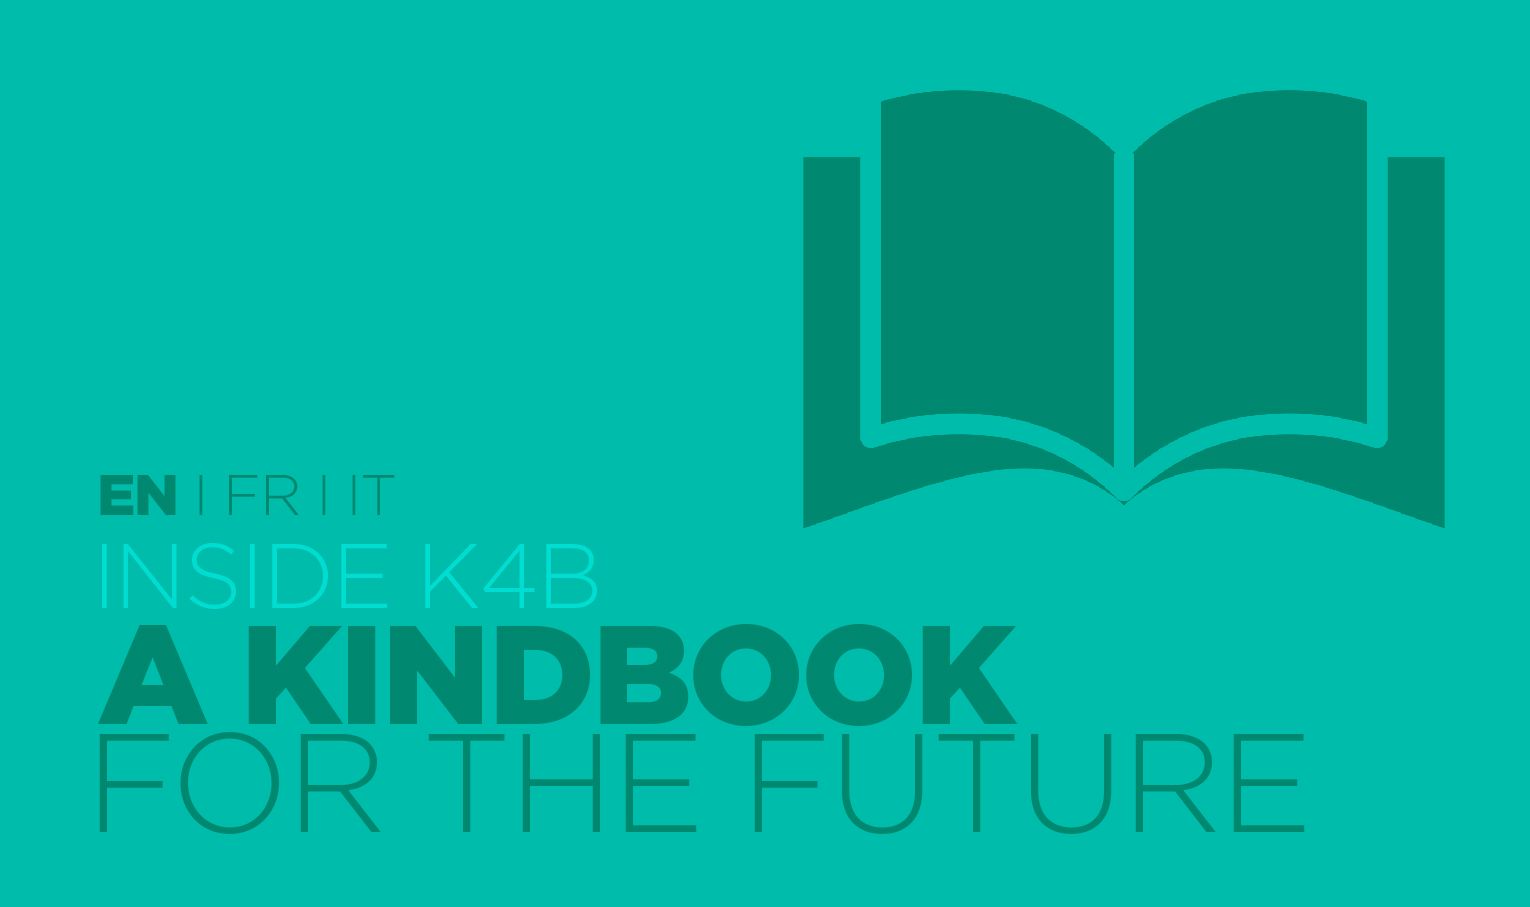 KINDNESSforBUSINESS IS INTRODUCING ITS FIRST KINDBOOK